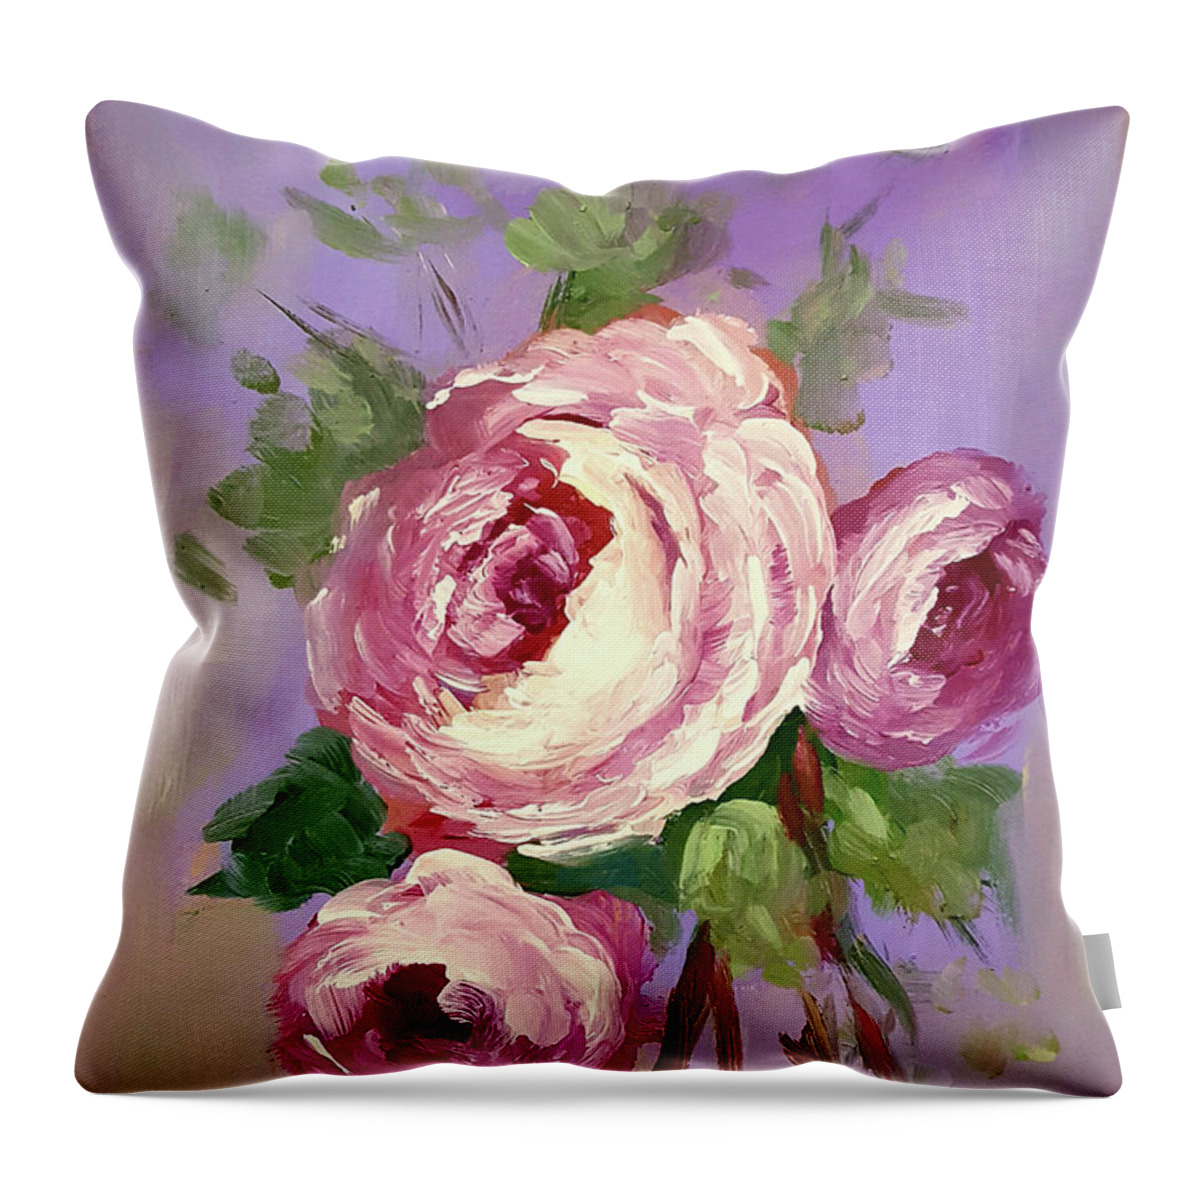 Rose Throw Pillow featuring the painting Pink Rose by Janet Garcia